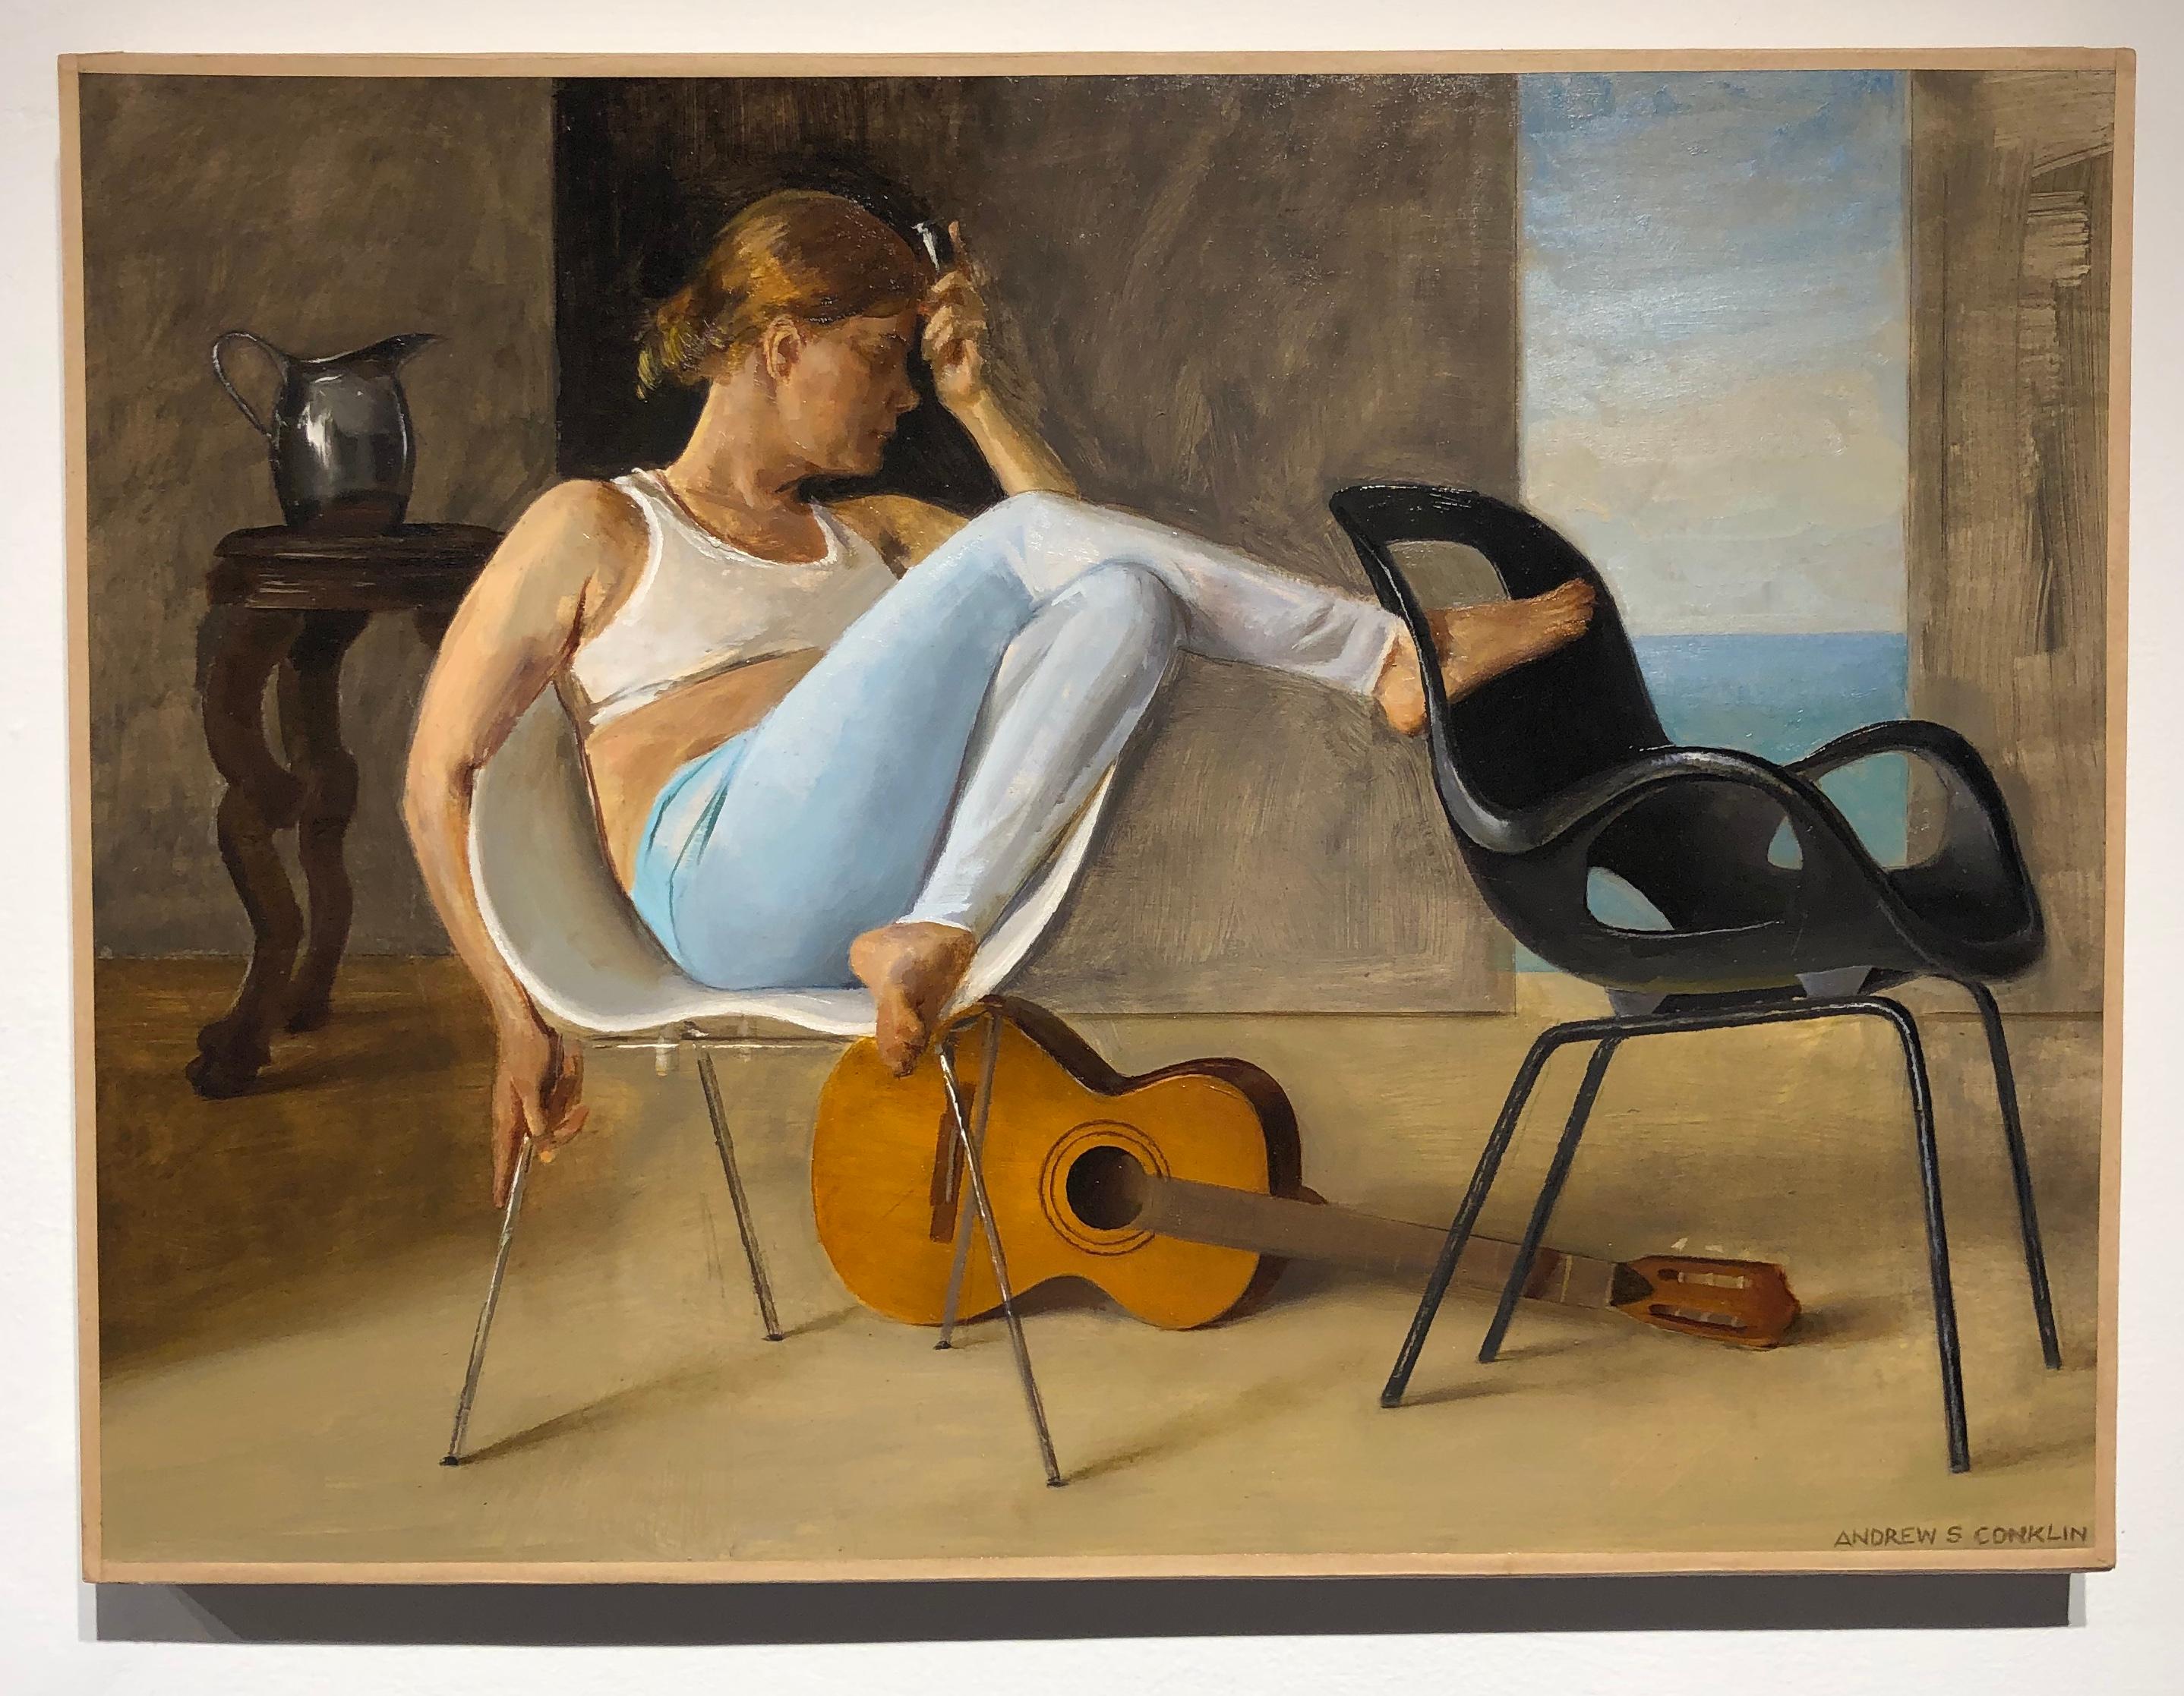 Ashley with Guitar, Female Lounging on a Tom Vac Chair, Original Oil on Panel - Painting by Andrew S. Conklin